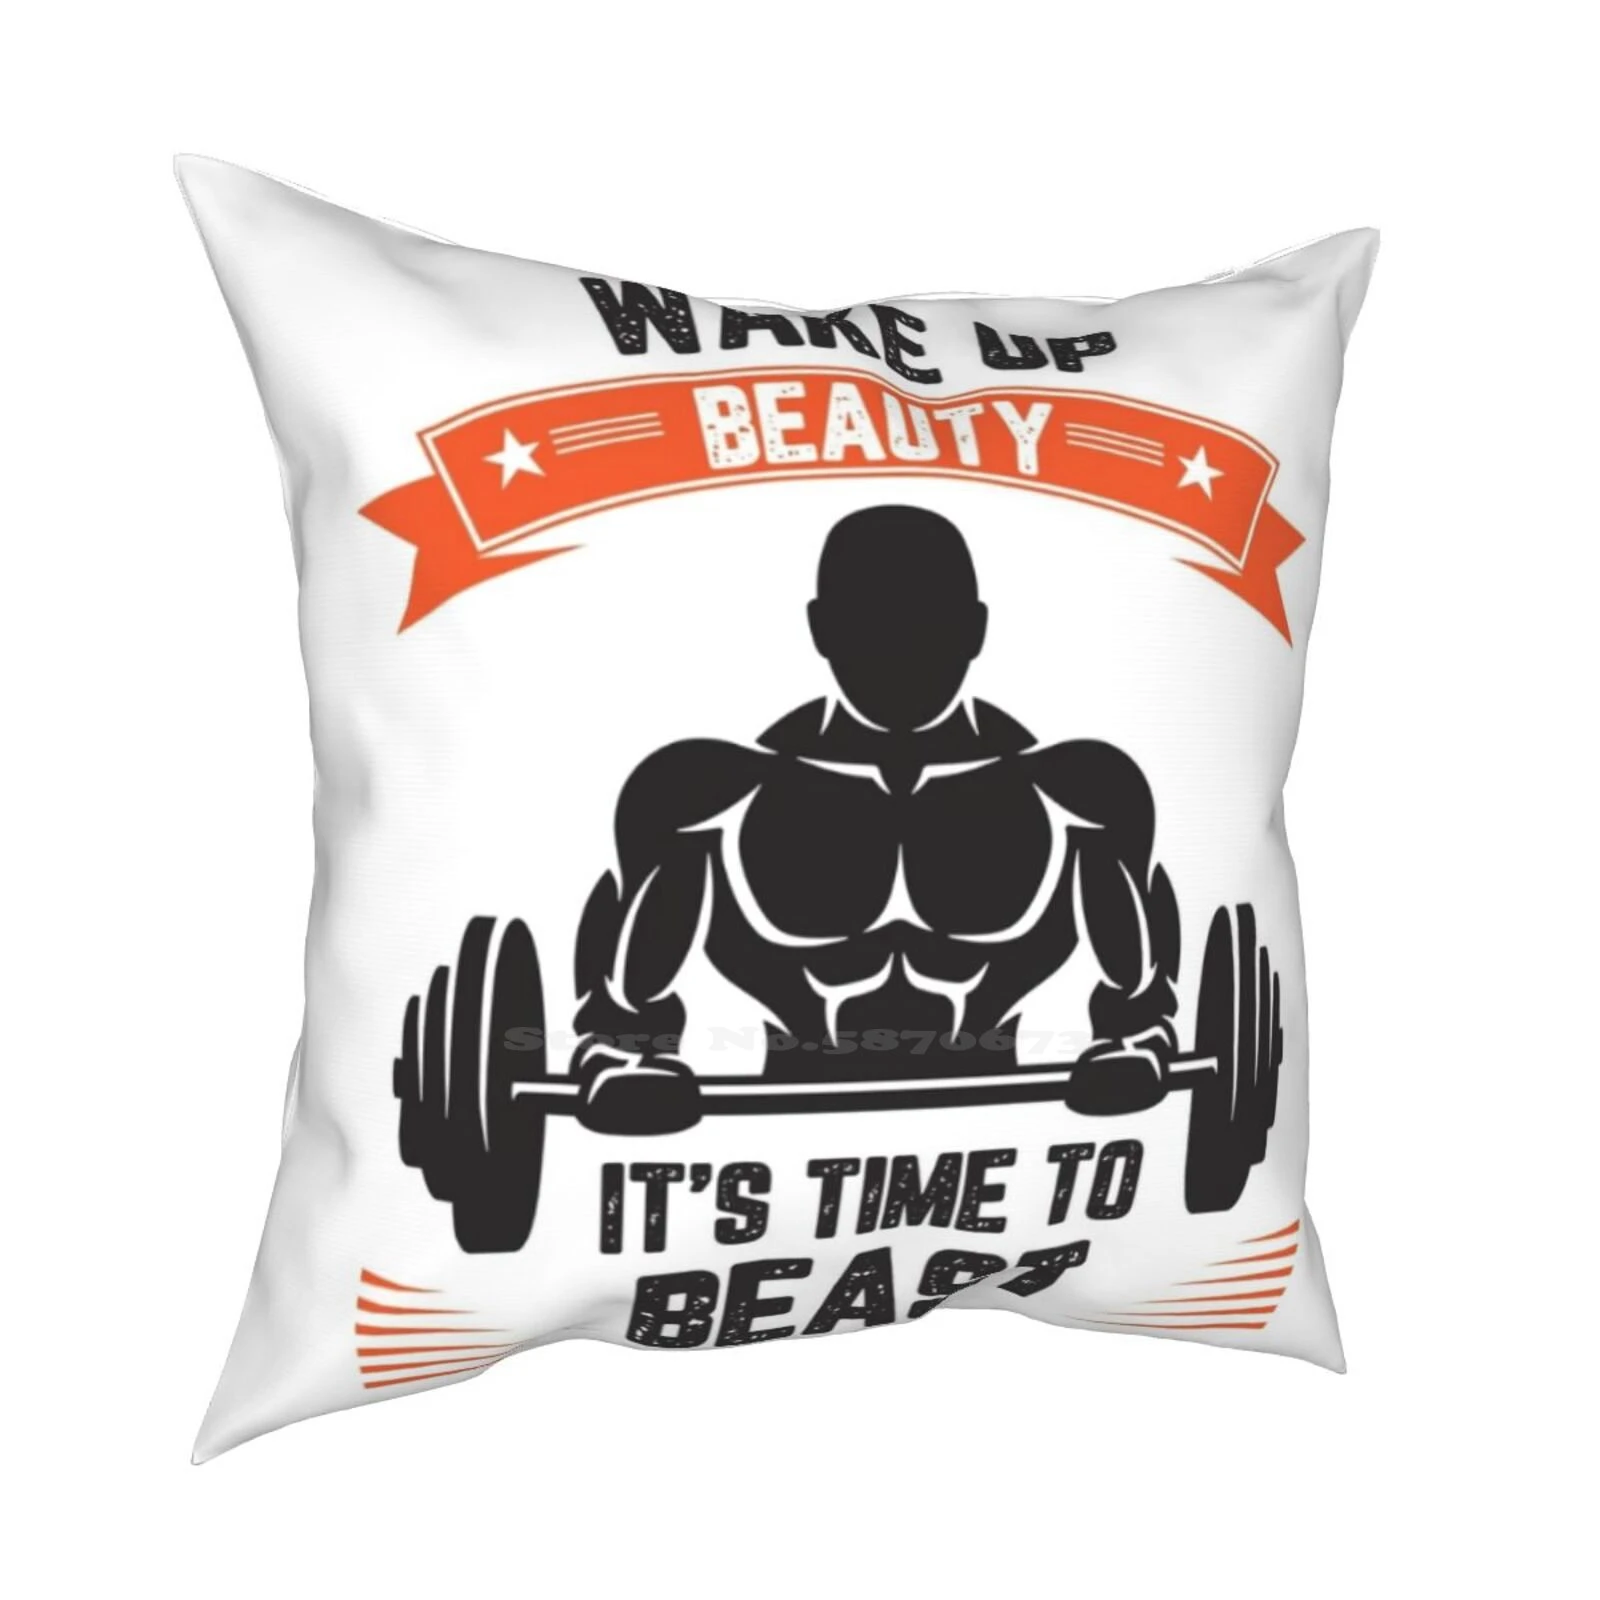 Marie Osmond Sex Porn - Wake Up Beauty It's Time To Beast Pillow Cover Hug Pillowcase Gym For Men  Bodybuilding Marie Osmond Gym Video Chair Gym Total - Pillow Case -  AliExpress